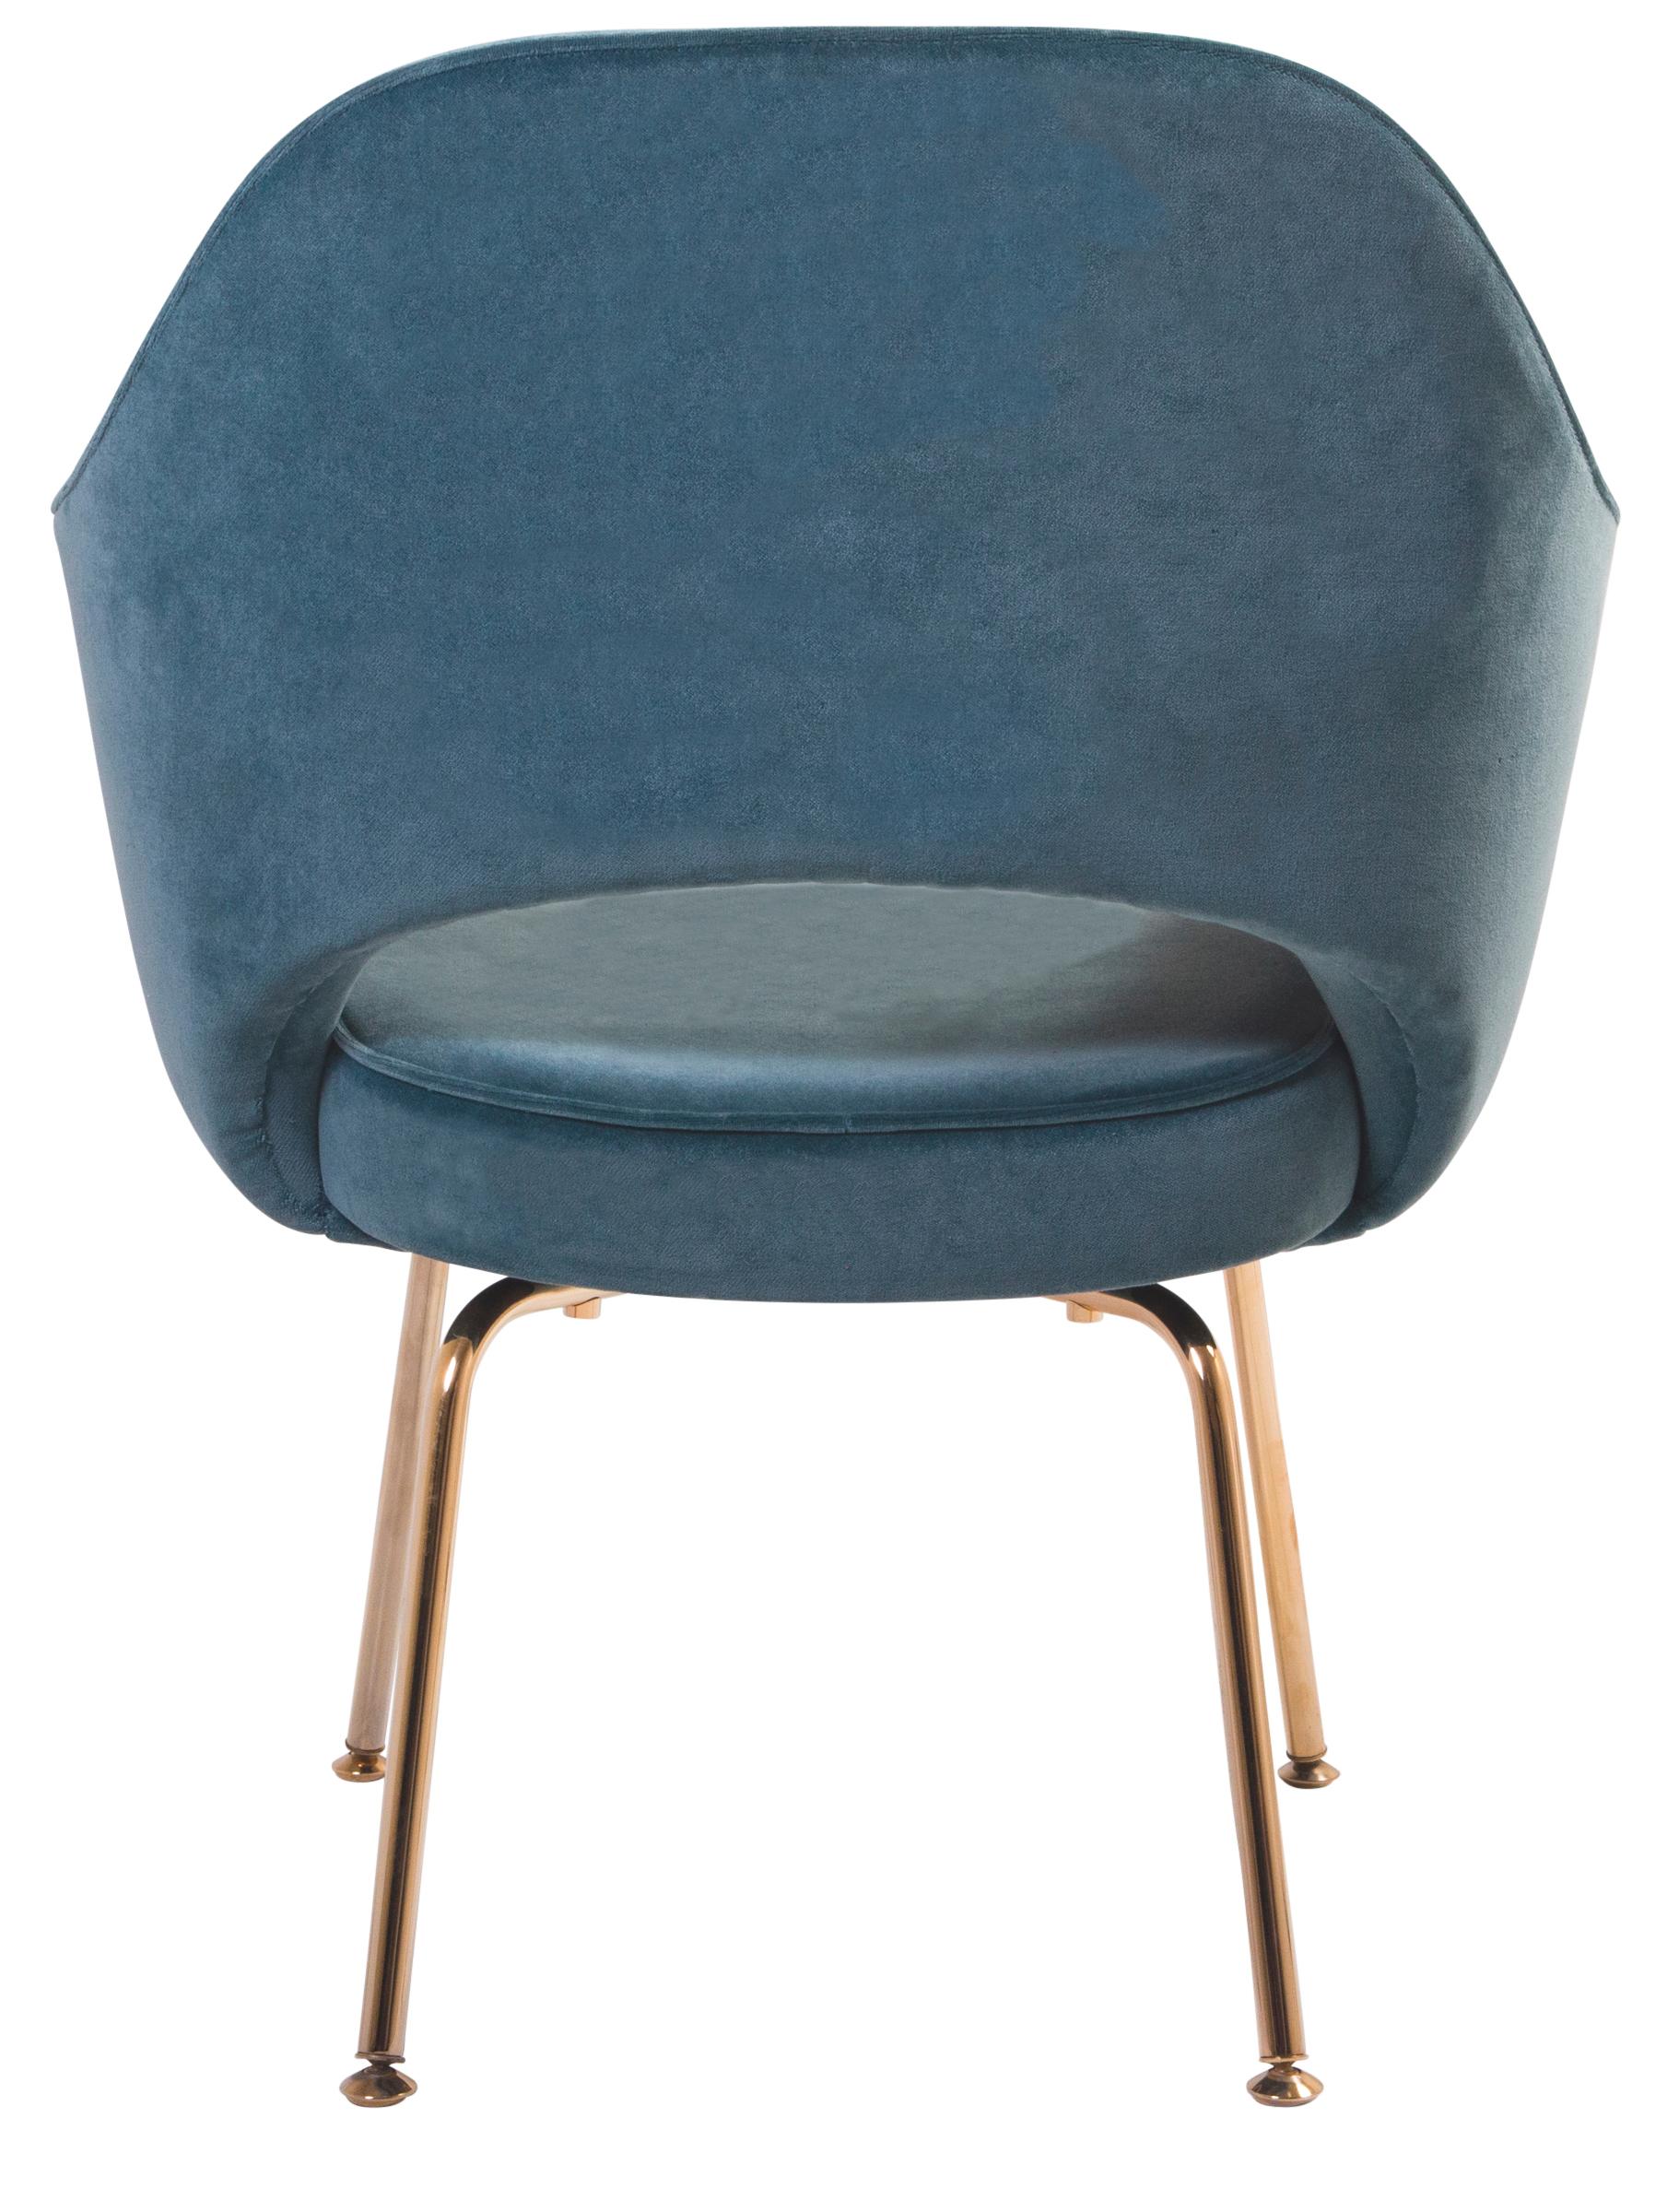 Saarinen Executive Arm Chairs in Pavo Blue Velvet, Gold Edition, Pair In Excellent Condition For Sale In Wilton, CT